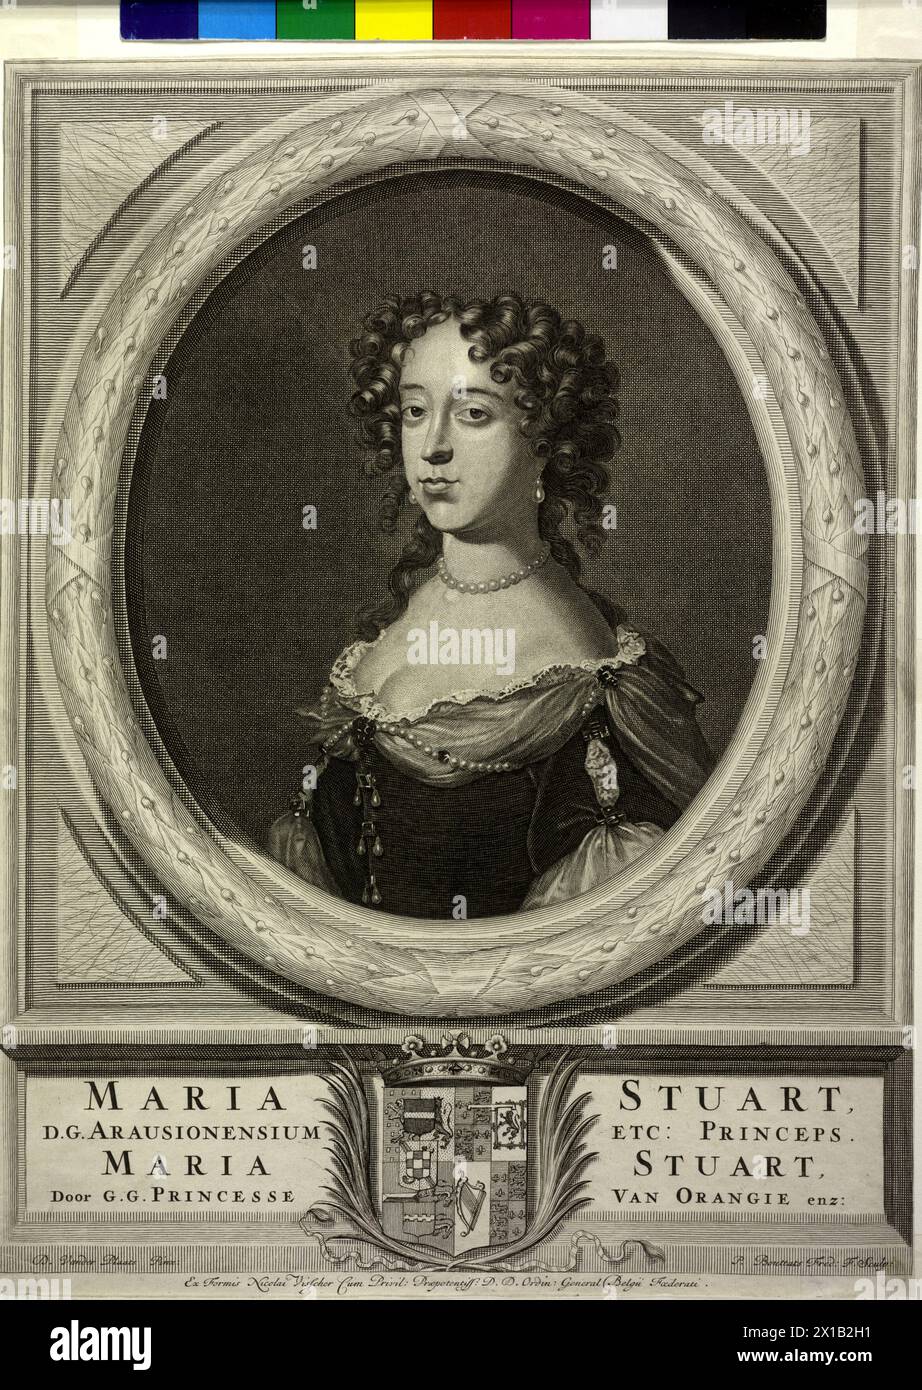 Mary II, Queen of England, as Princess of Orange: 3 / 4 from the left, with short undulated hair, two entice around the shoulders die away, pearl earrings and, in far décolleté dress with surveying pearl string and train retainer around the excerpt, by middle jewel downward three pieces of jewellery with geminate drop pearls, in oval framing, occupied with Kranz from bulging sinuously bay leaf, surround by rectangle supplement section lining panel with protuberant elbow joints, underneath, midst of a double-spaced Latin. and double-spaced Dutch legend at bright pedestal frontside, their crowne Stock Photo